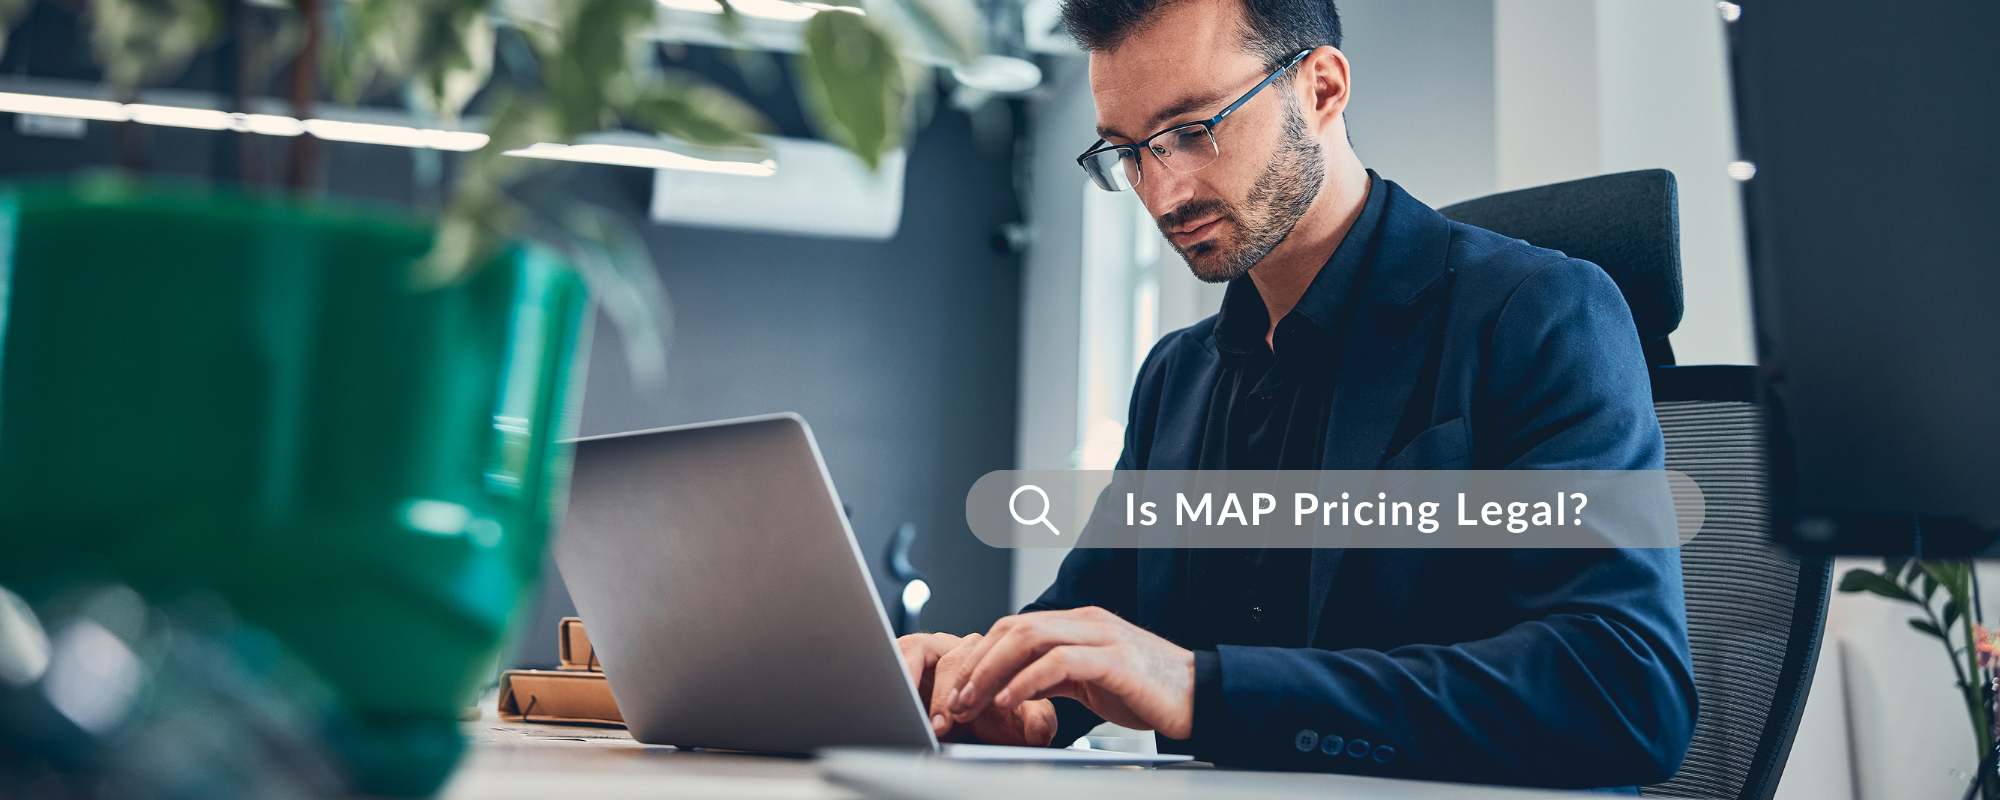 A man searching on a laptop, "is MAP pricing legal?"